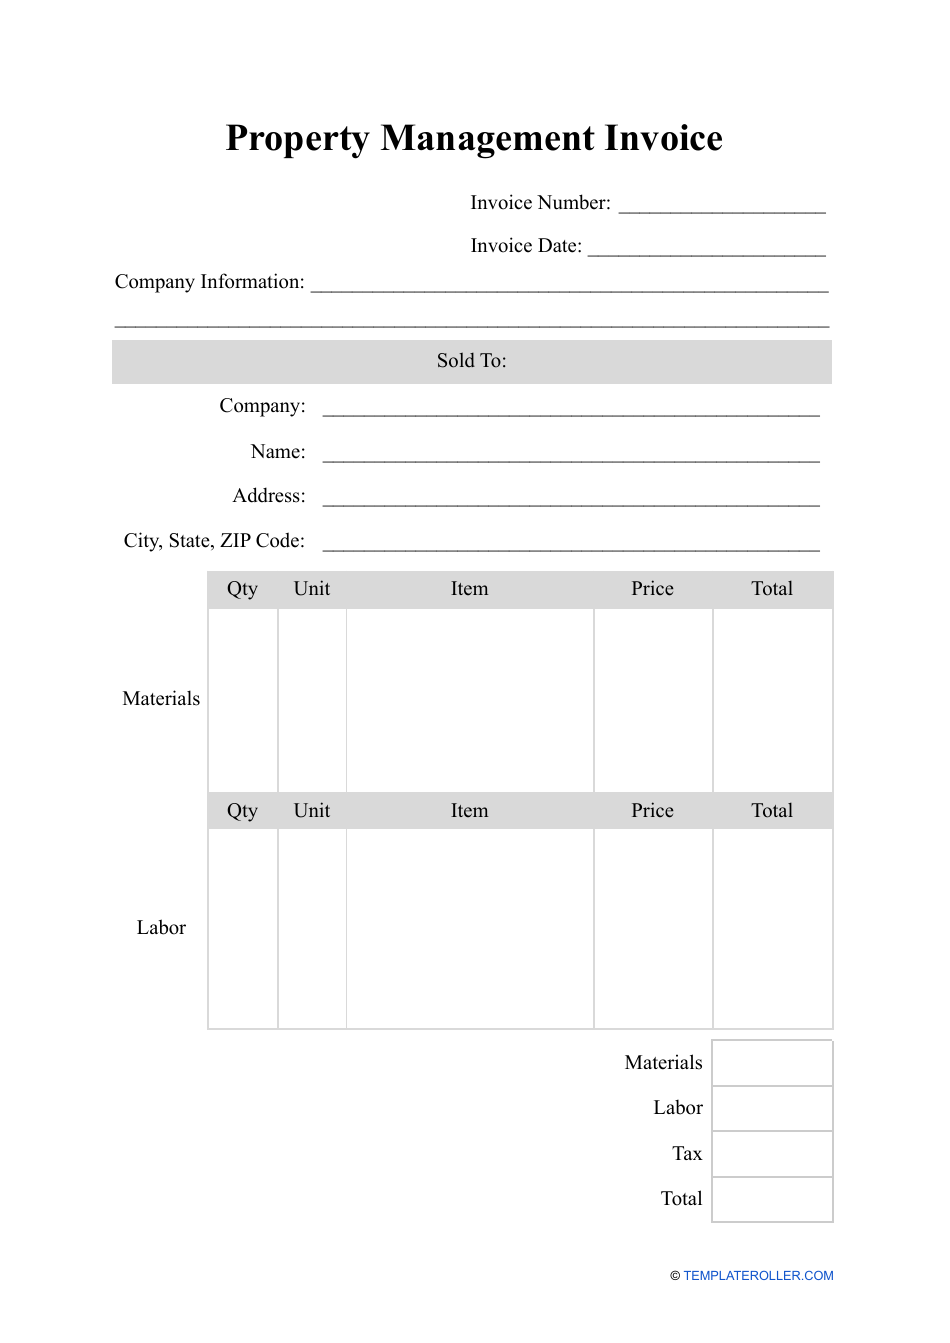 Property Management Invoice Template, Page 1